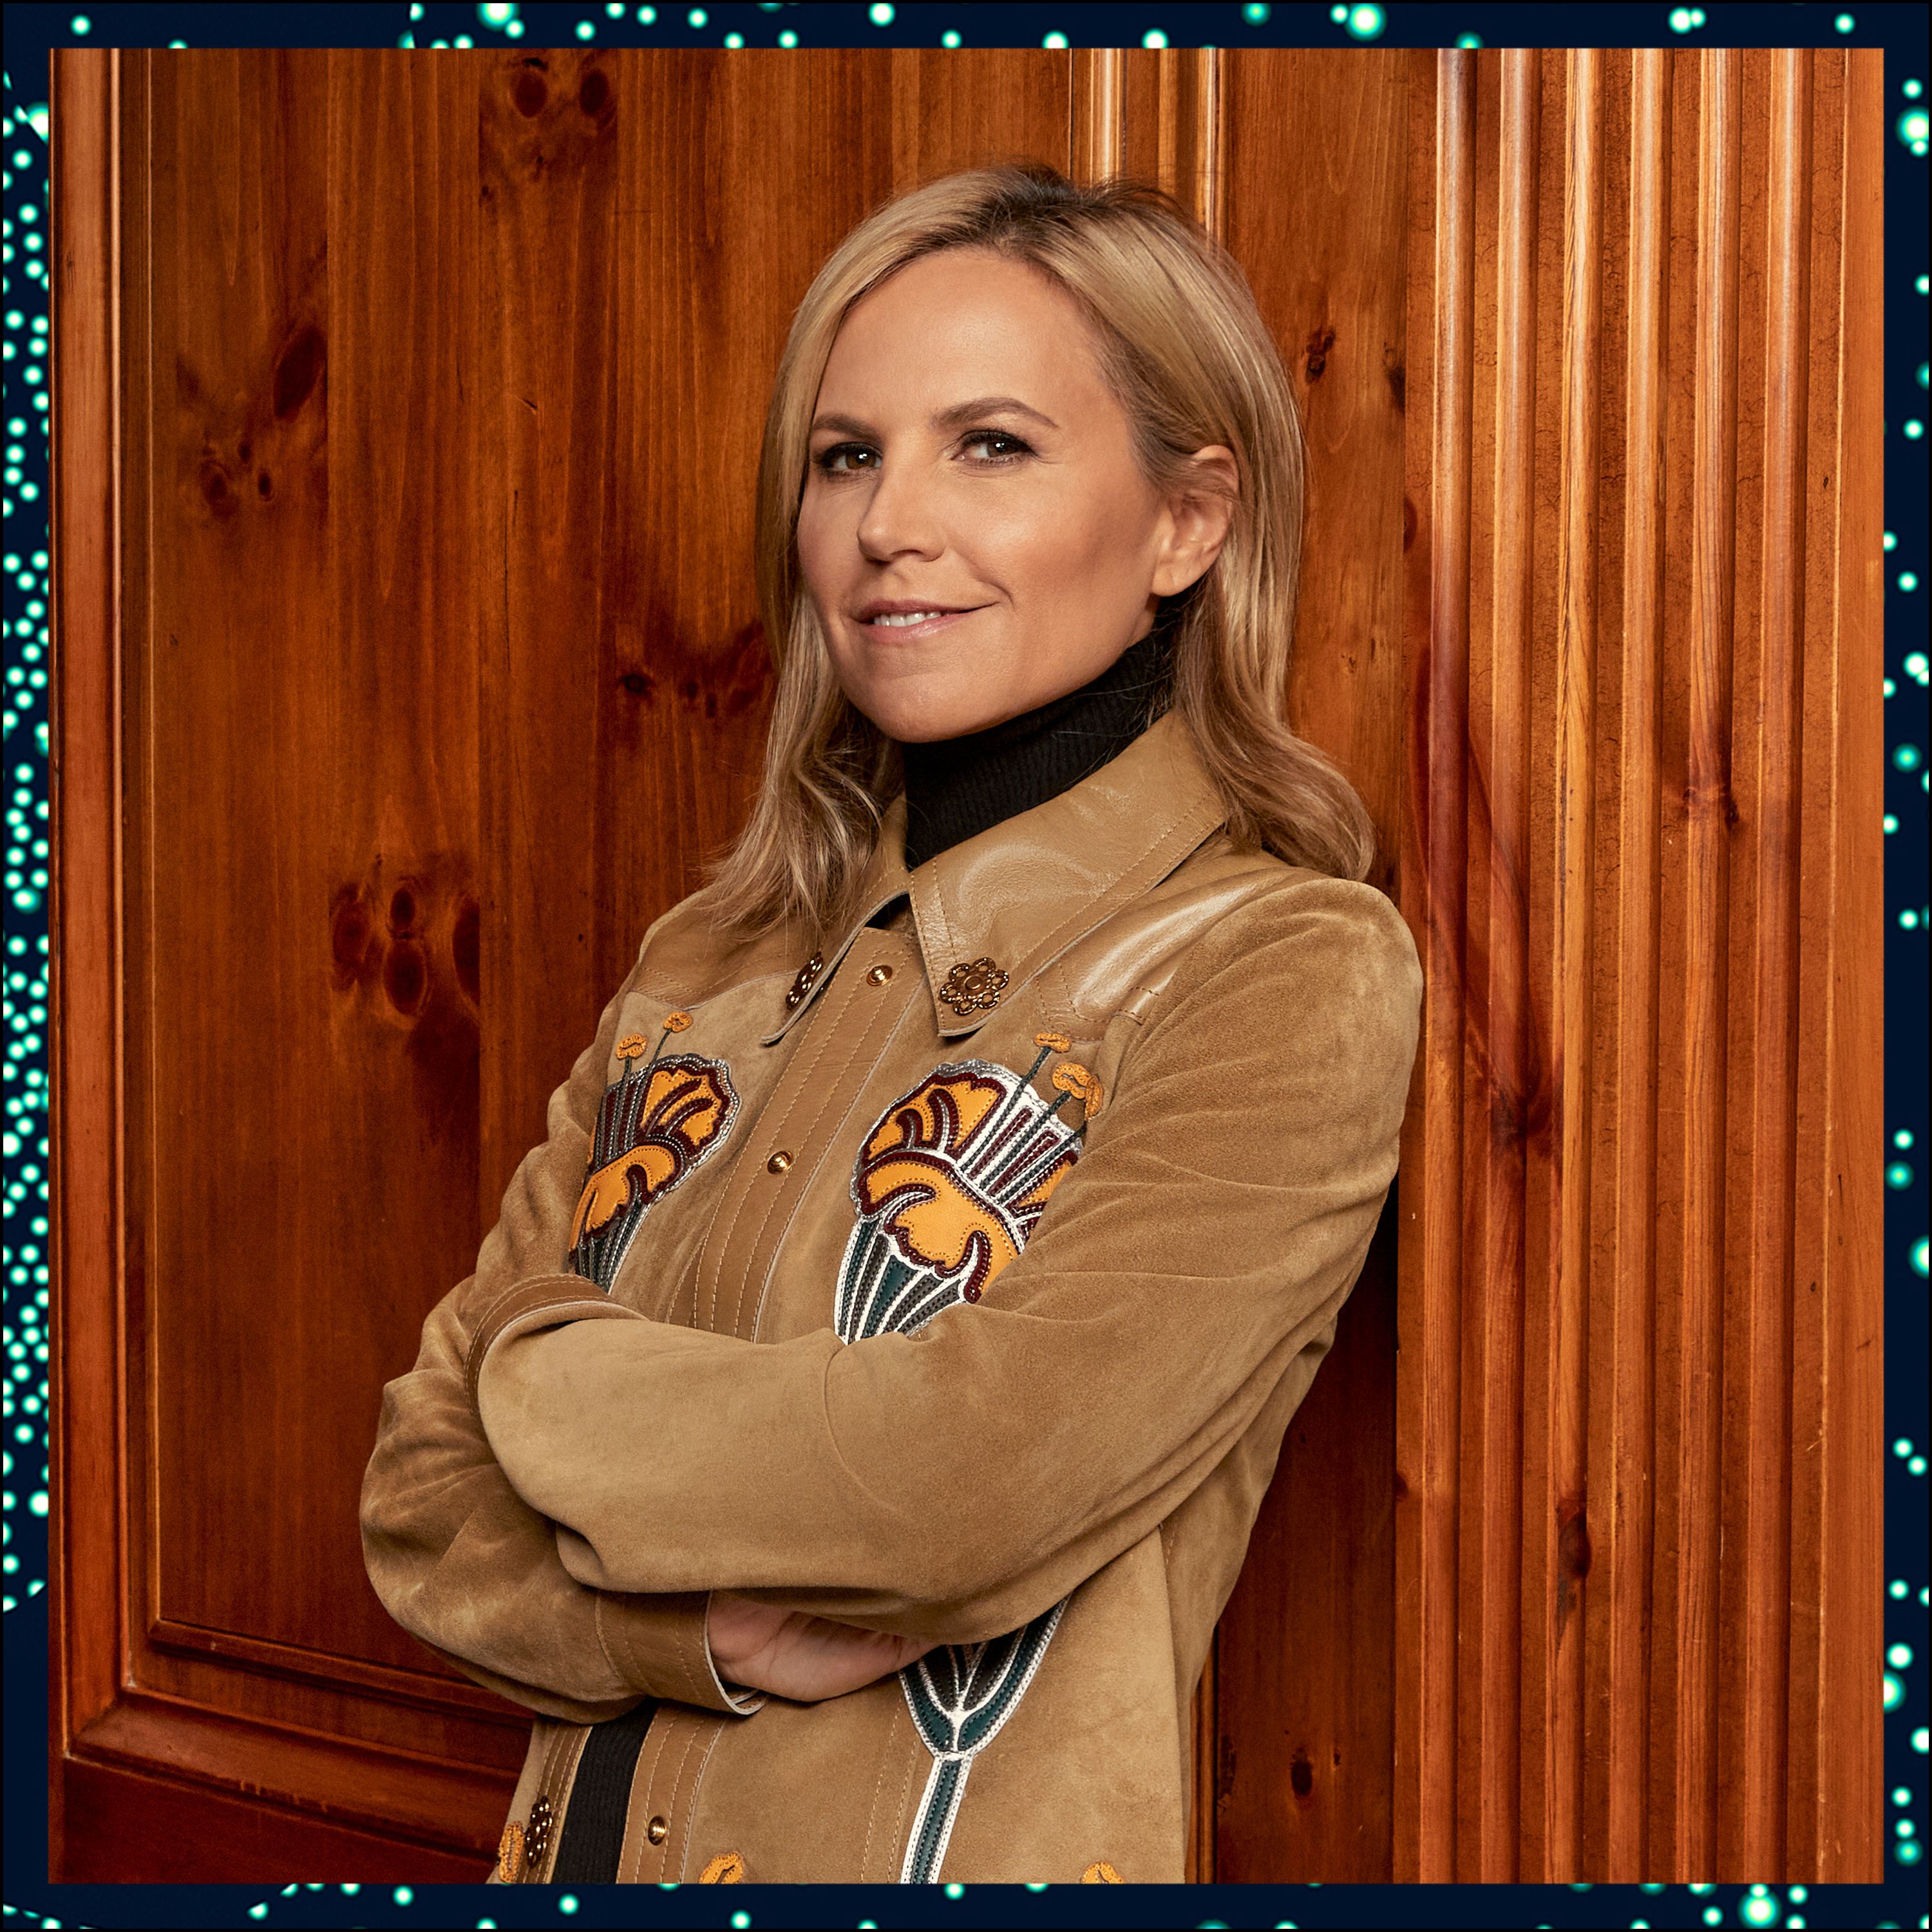 Tory Burch on Ambition, Timeless Fashion, and Her Foundation